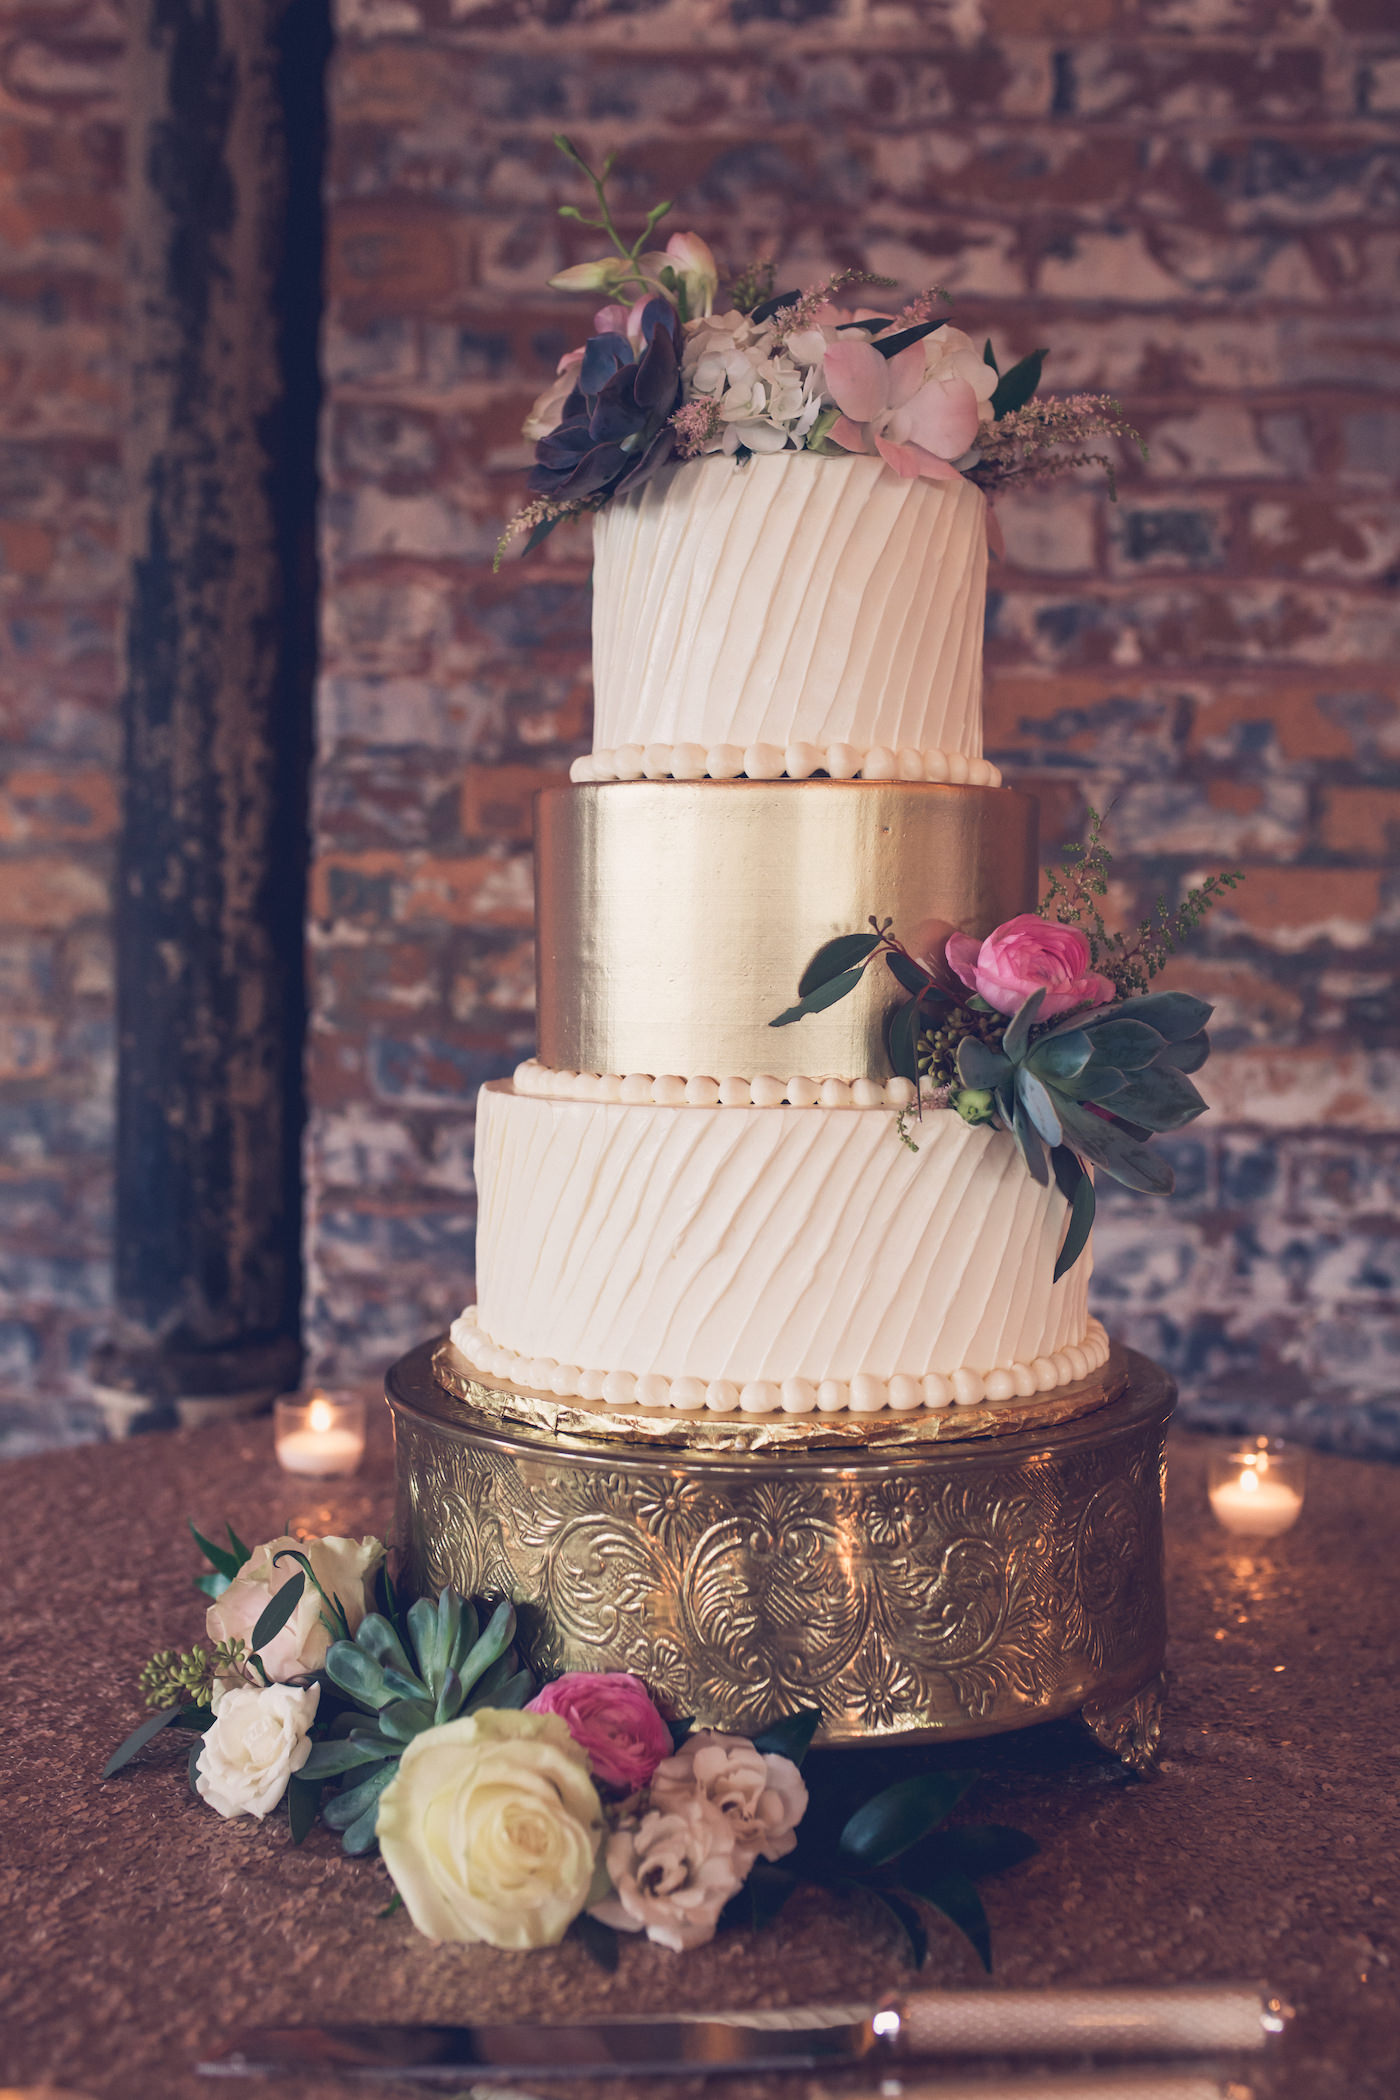 Wedding Cake Table with Champagne Rose Gold Sequin Linen and Votive Candles | Three Tier Gold and Ivory Textured Buttercream Wedding Cake with Fresh Flowers on Round Ornate Gold Cake Stand | Tampa Wedding Bakery The Artistic Whisk